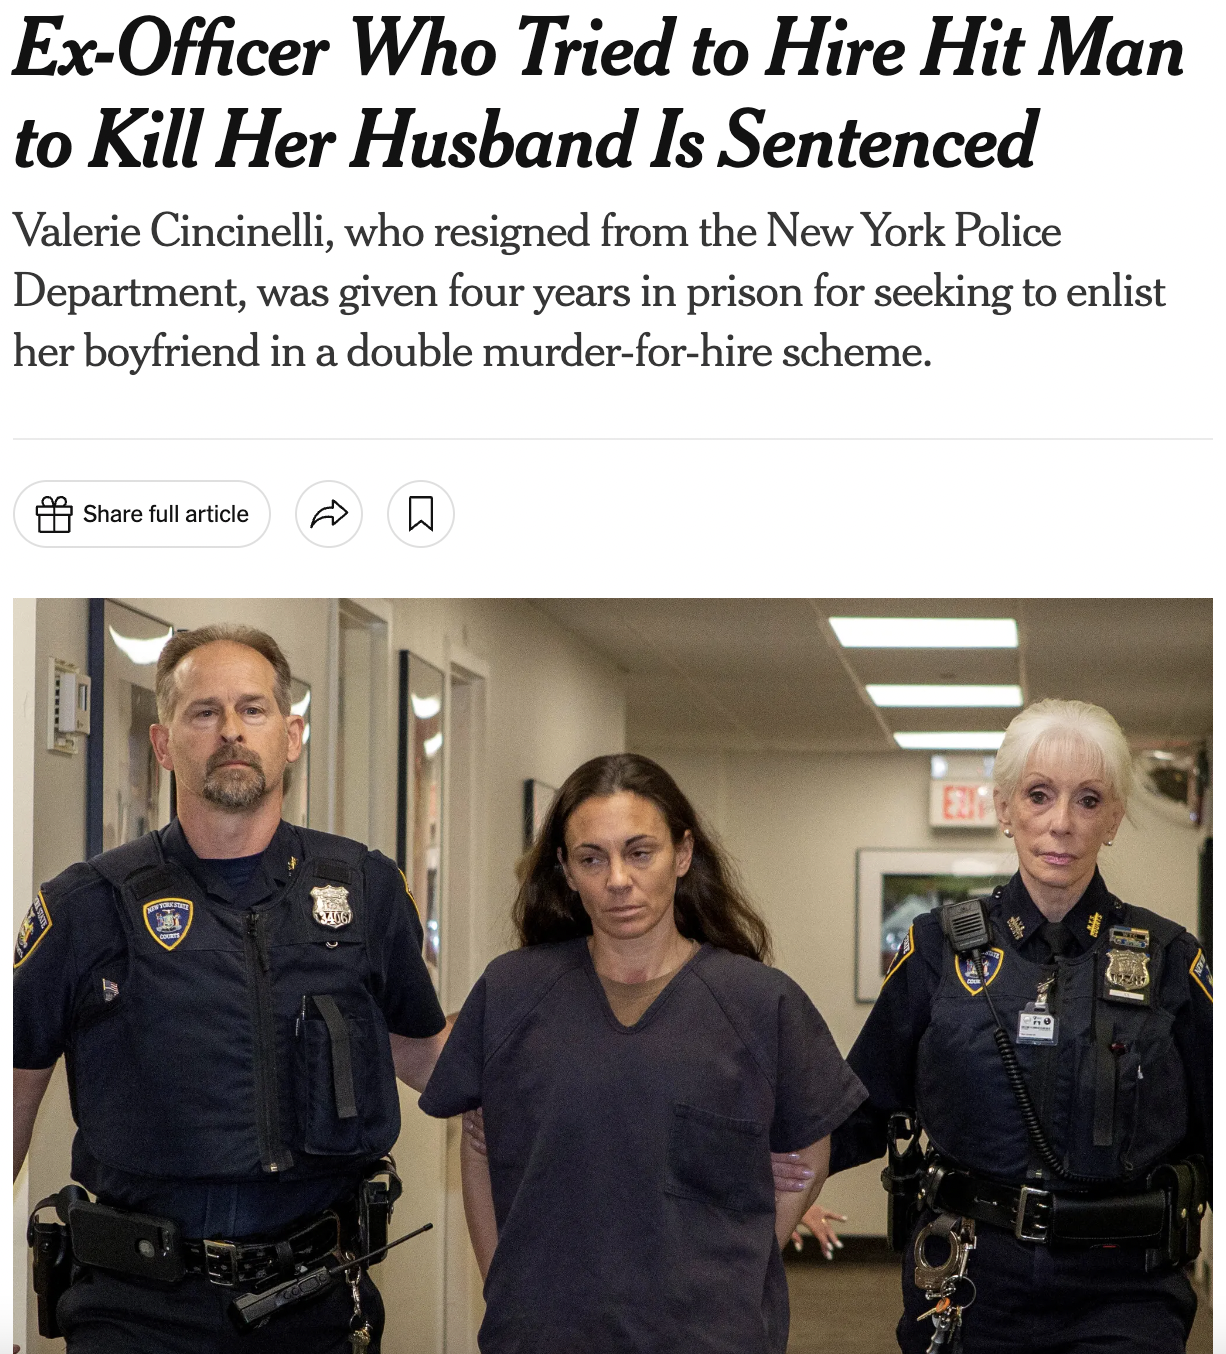 staff - ExOfficer Who Tried to Hire Hit Man to Kill Her Husband Is Sentenced Valerie Cincinelli, who resigned from the New York Police Department, was given four years in prison for seeking to enlist her boyfriend in a double murderforhire scheme. full ar